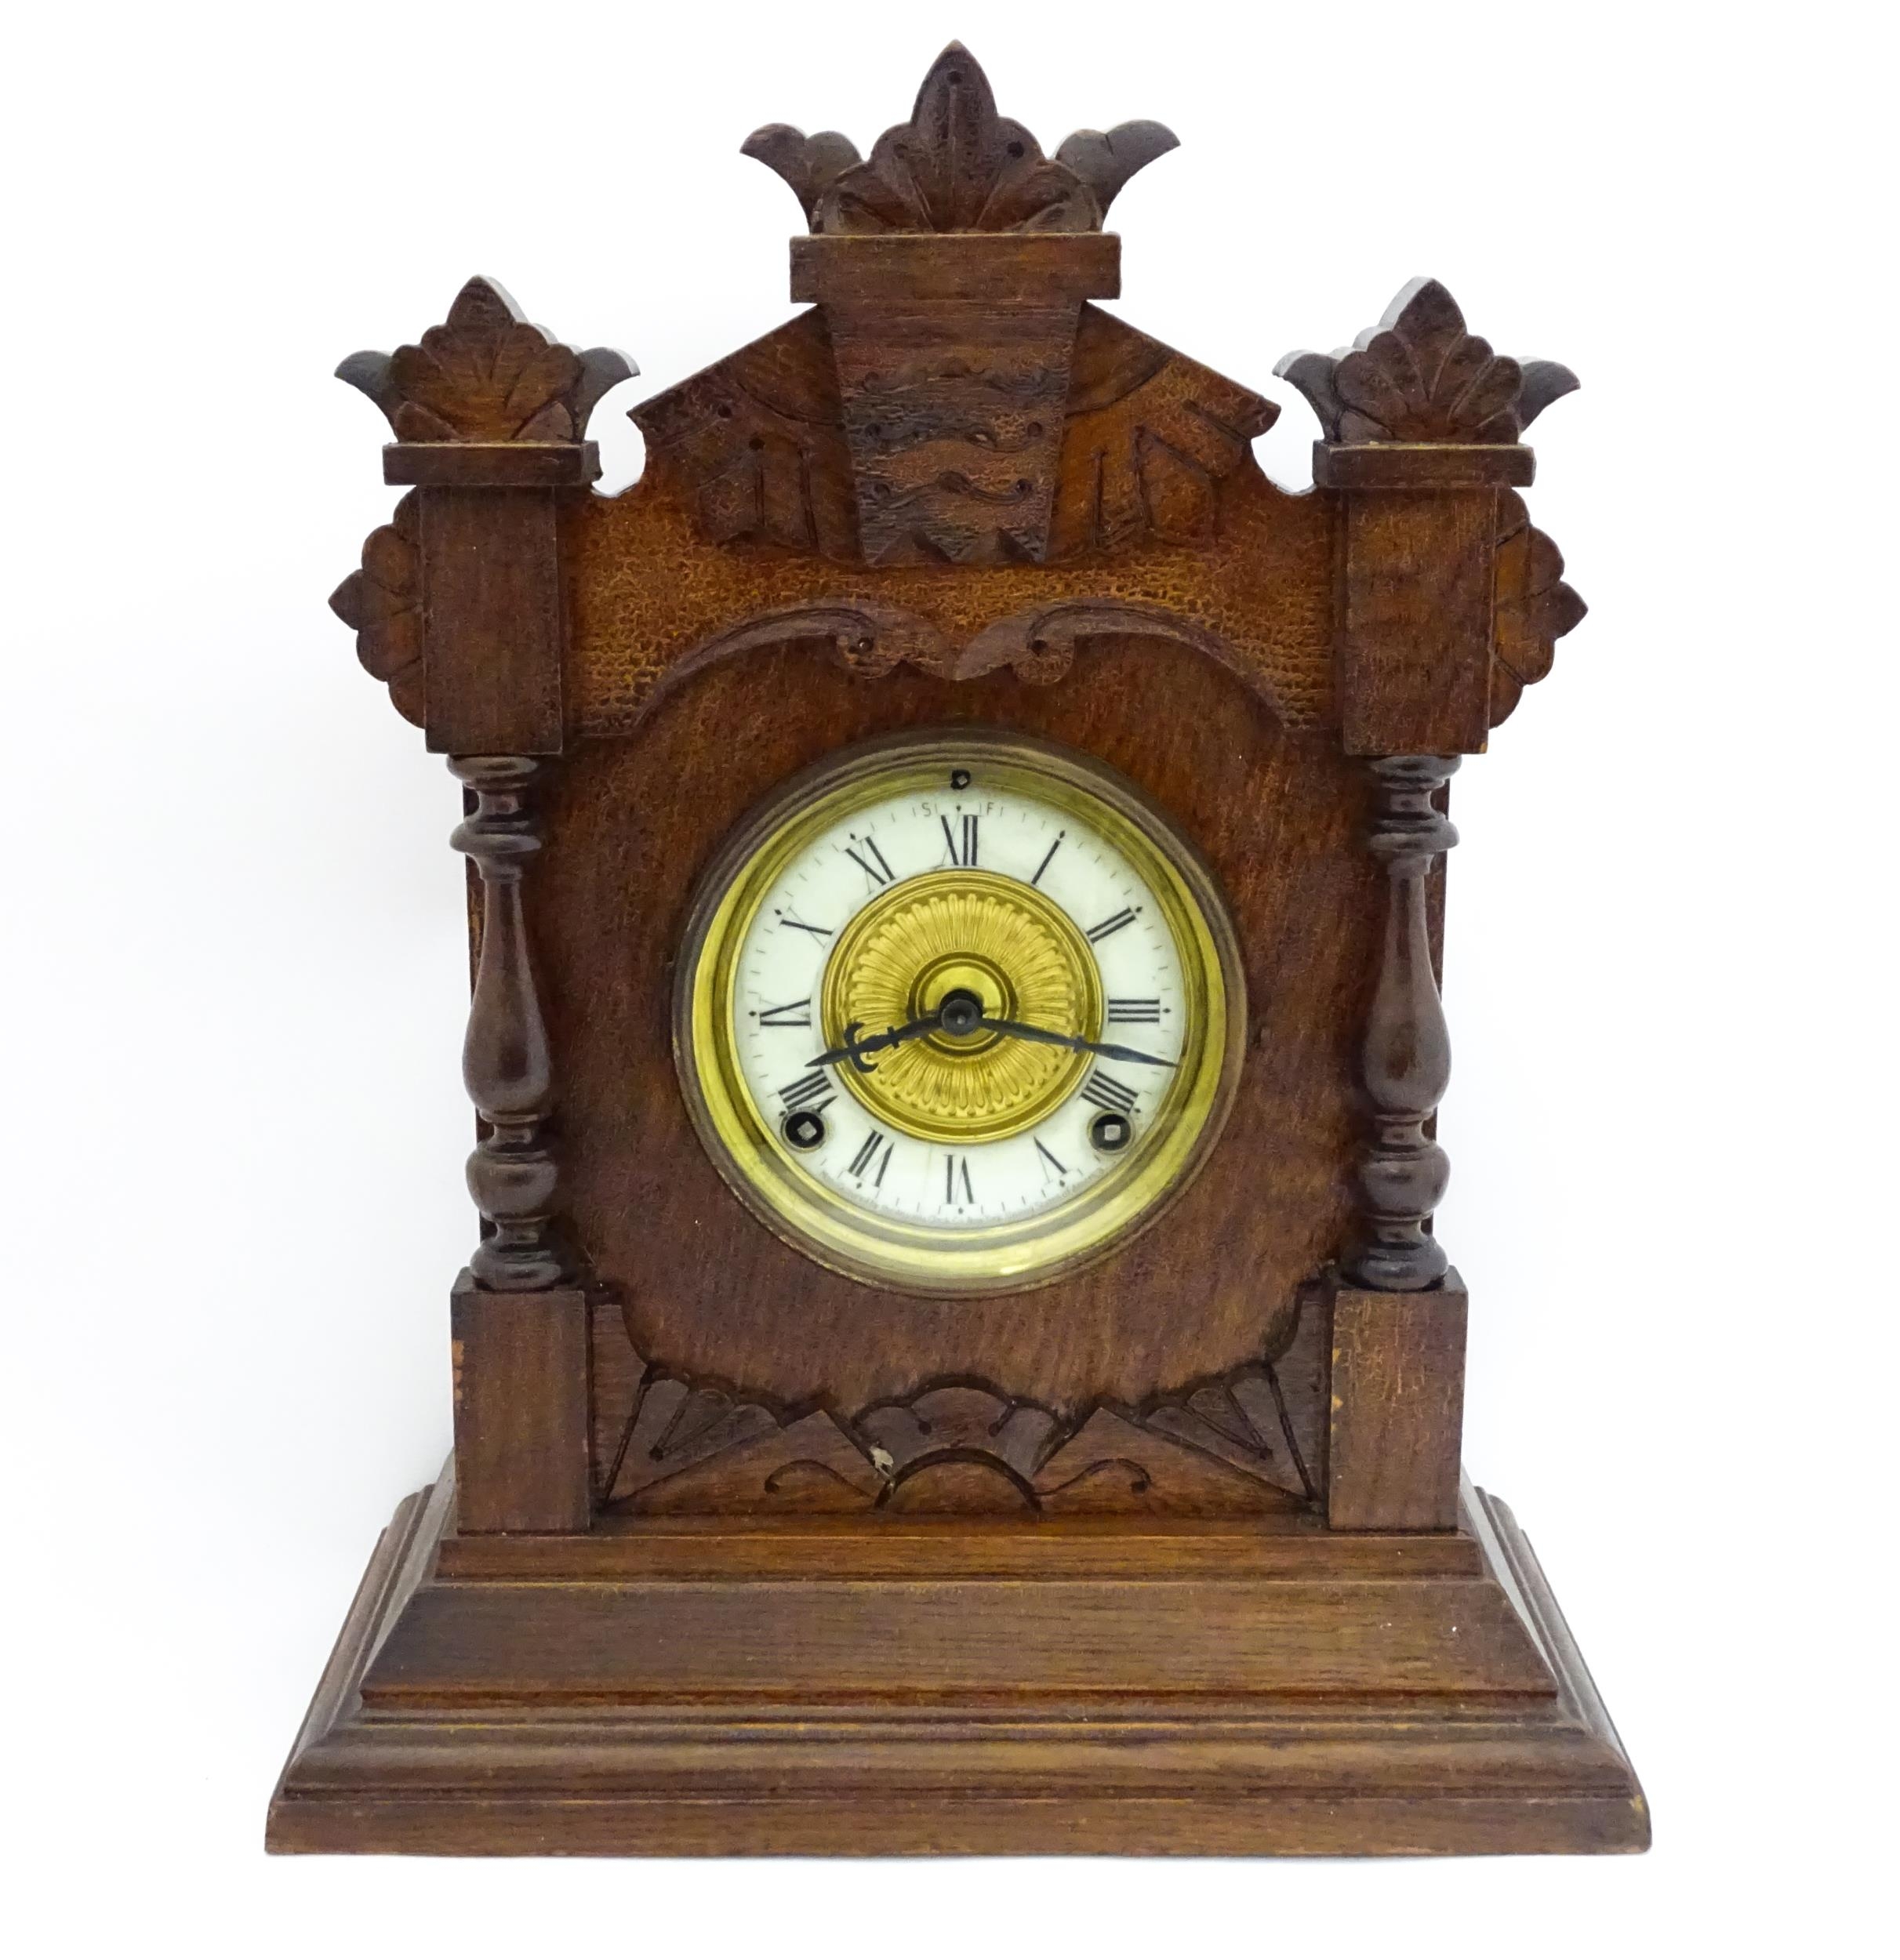 A Late 19thC / Early 20thC American oak cased mantle clock by the Ansonia Clock Company - New